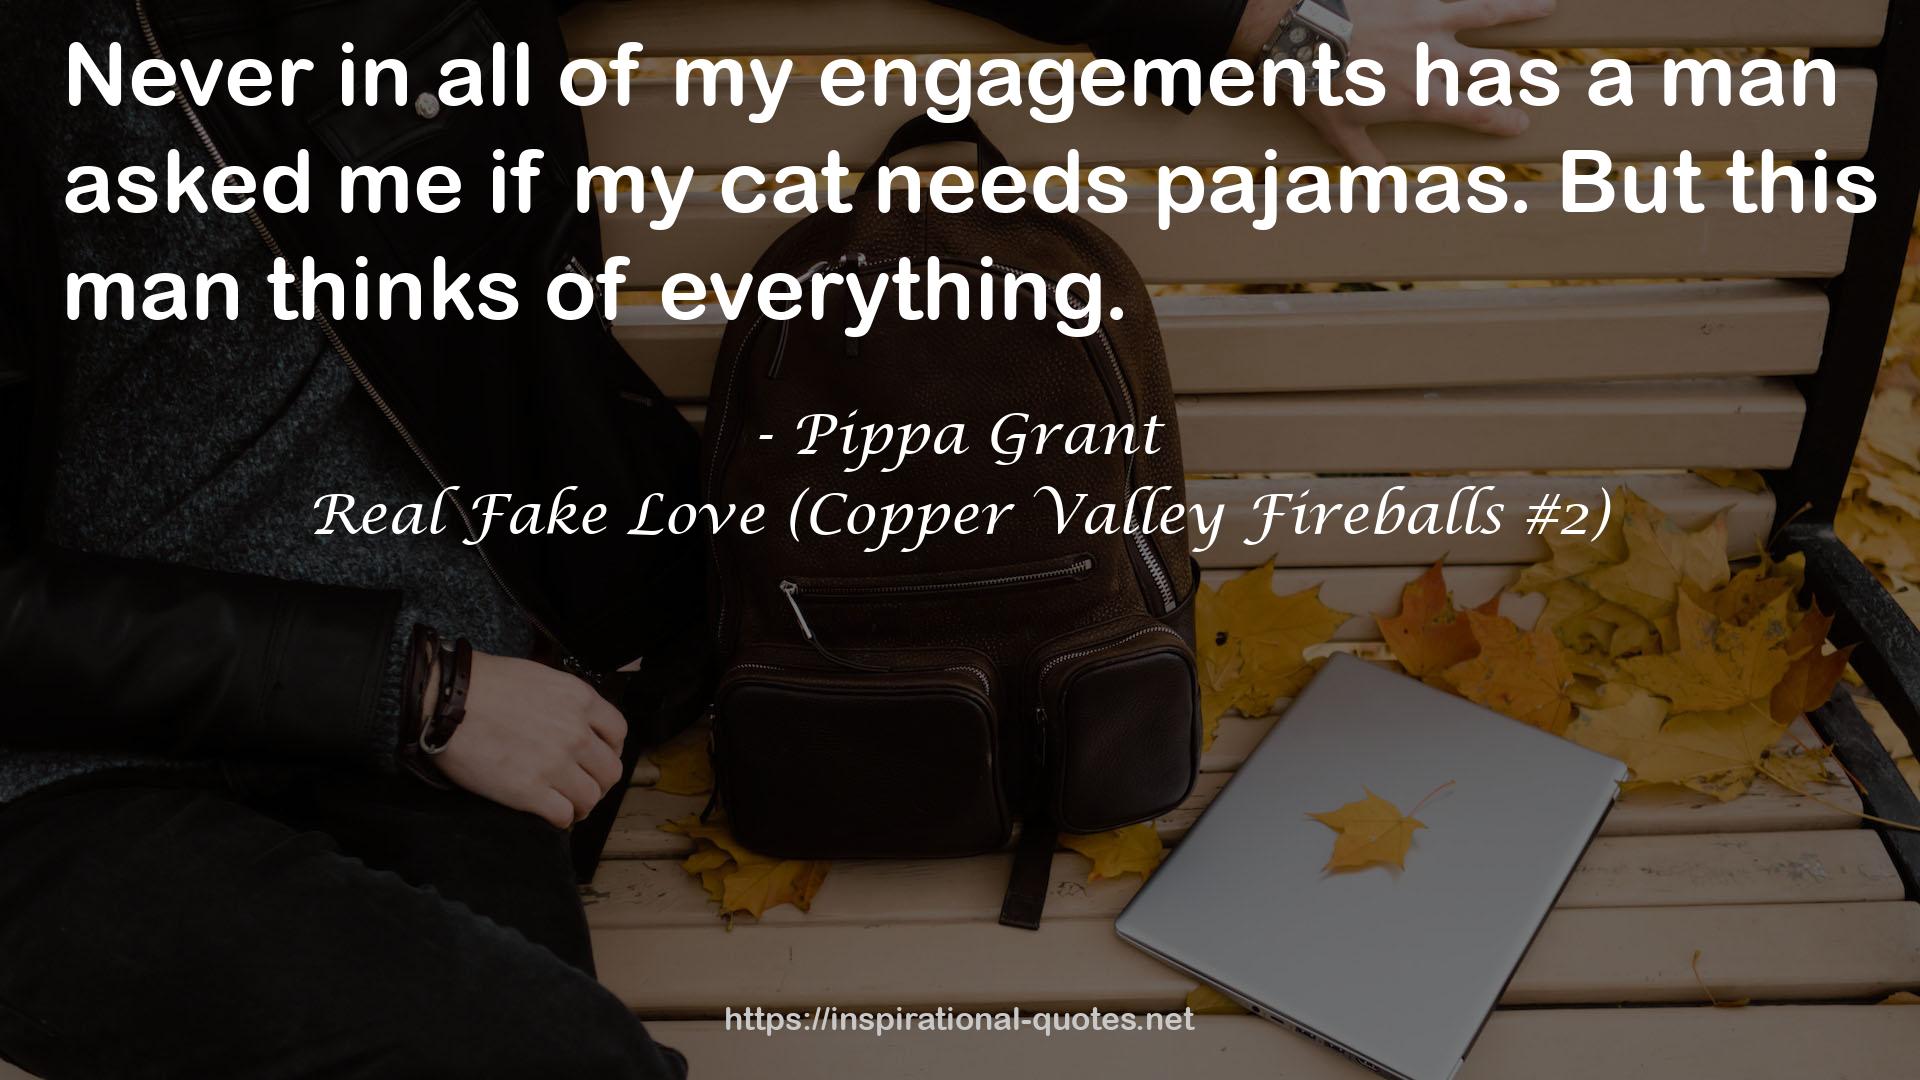 Real Fake Love (Copper Valley Fireballs #2) QUOTES